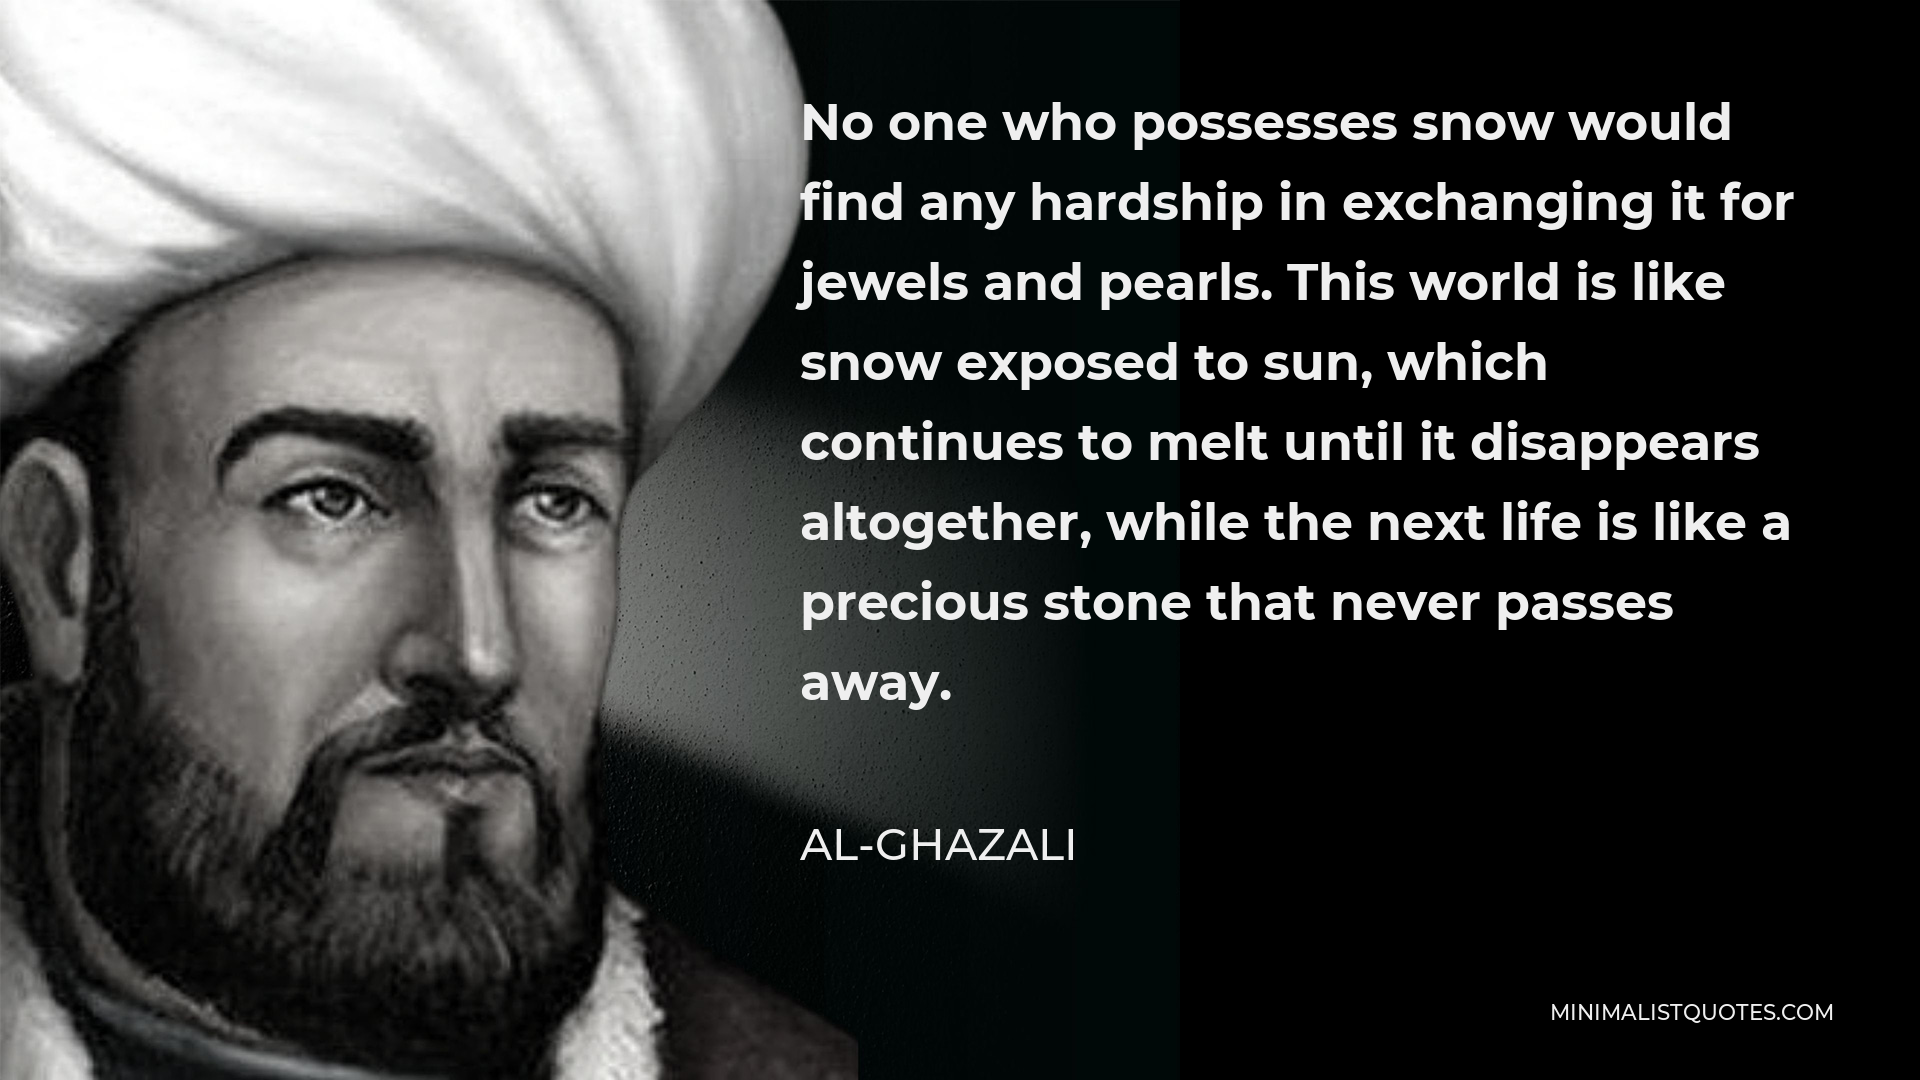 Al-Ghazali Quote - No one who possesses snow would find any hardship in exchanging it for jewels and pearls. This world is like snow exposed to sun, which continues to melt until it disappears altogether, while the next life is like a precious stone that never passes away.